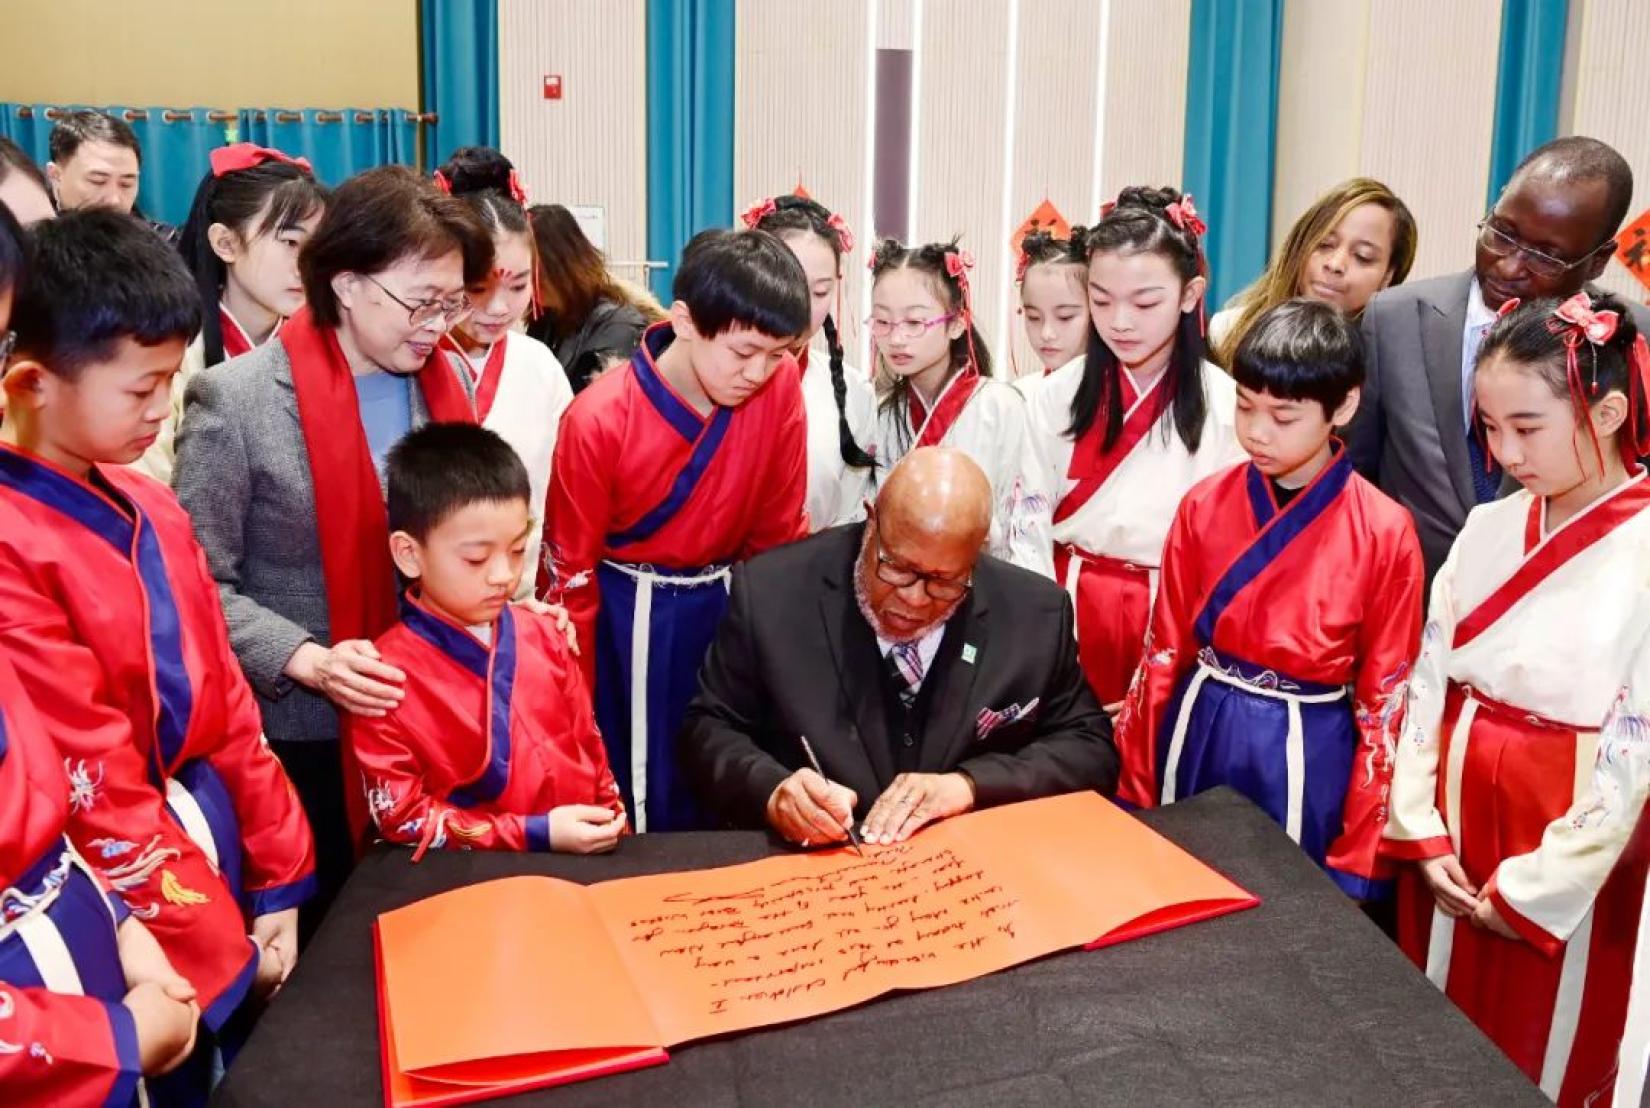 Mr. Dennis Francis, President of the UN General Assembly, writes a message of blessing at the National Children’s Center in Beijing